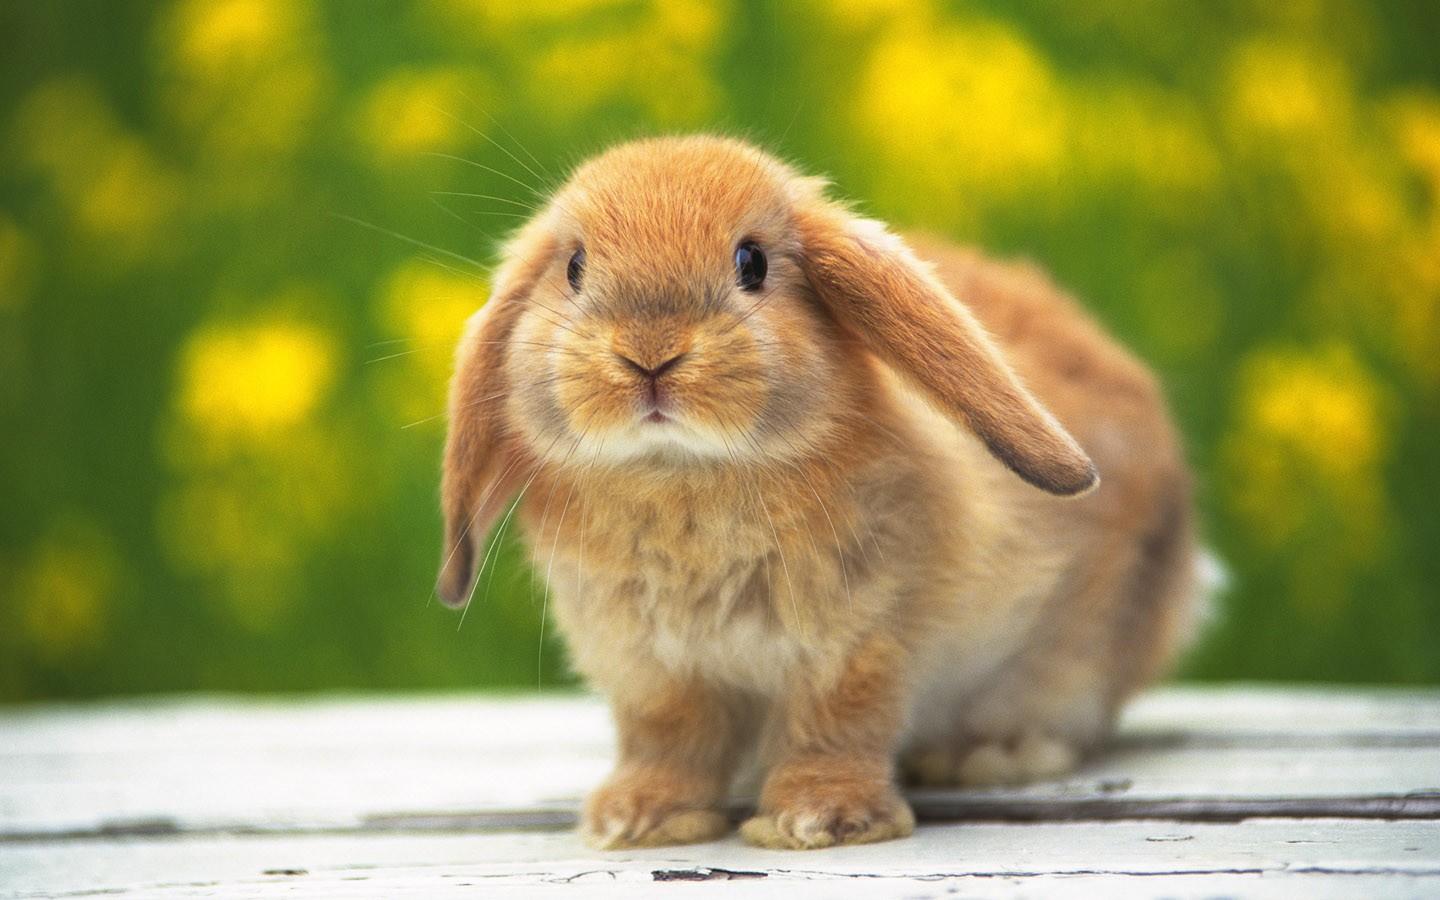 All Wallpapers Cute Rabbit hd Wallpapers 2013 1440x900